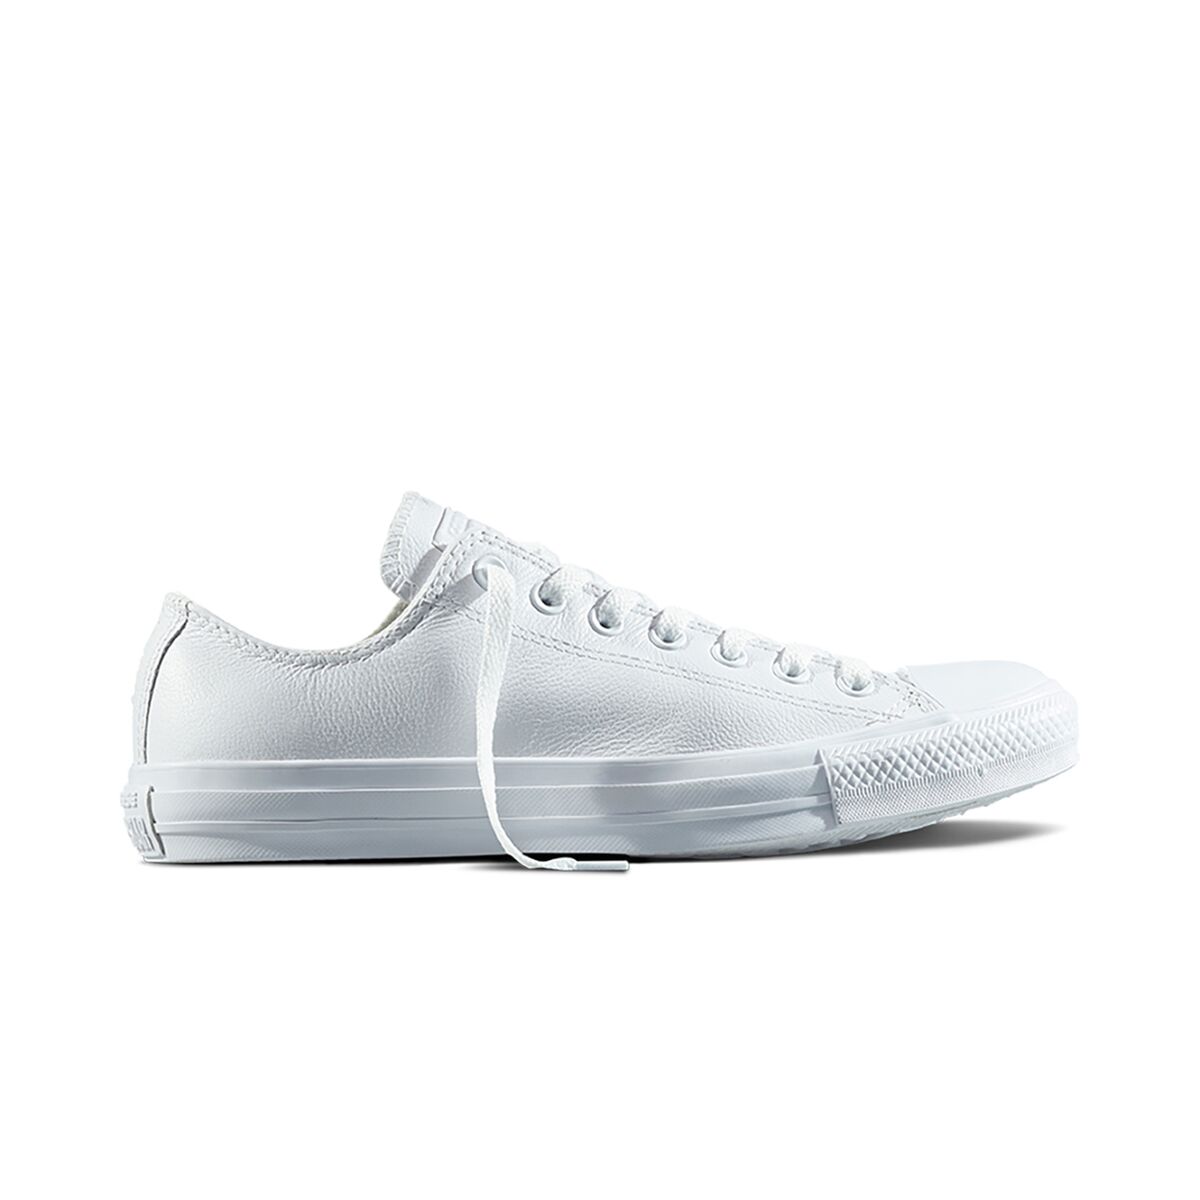 CONVERSE Sneakers Chuck Taylor All Star Mono Ox, Leder WEISS